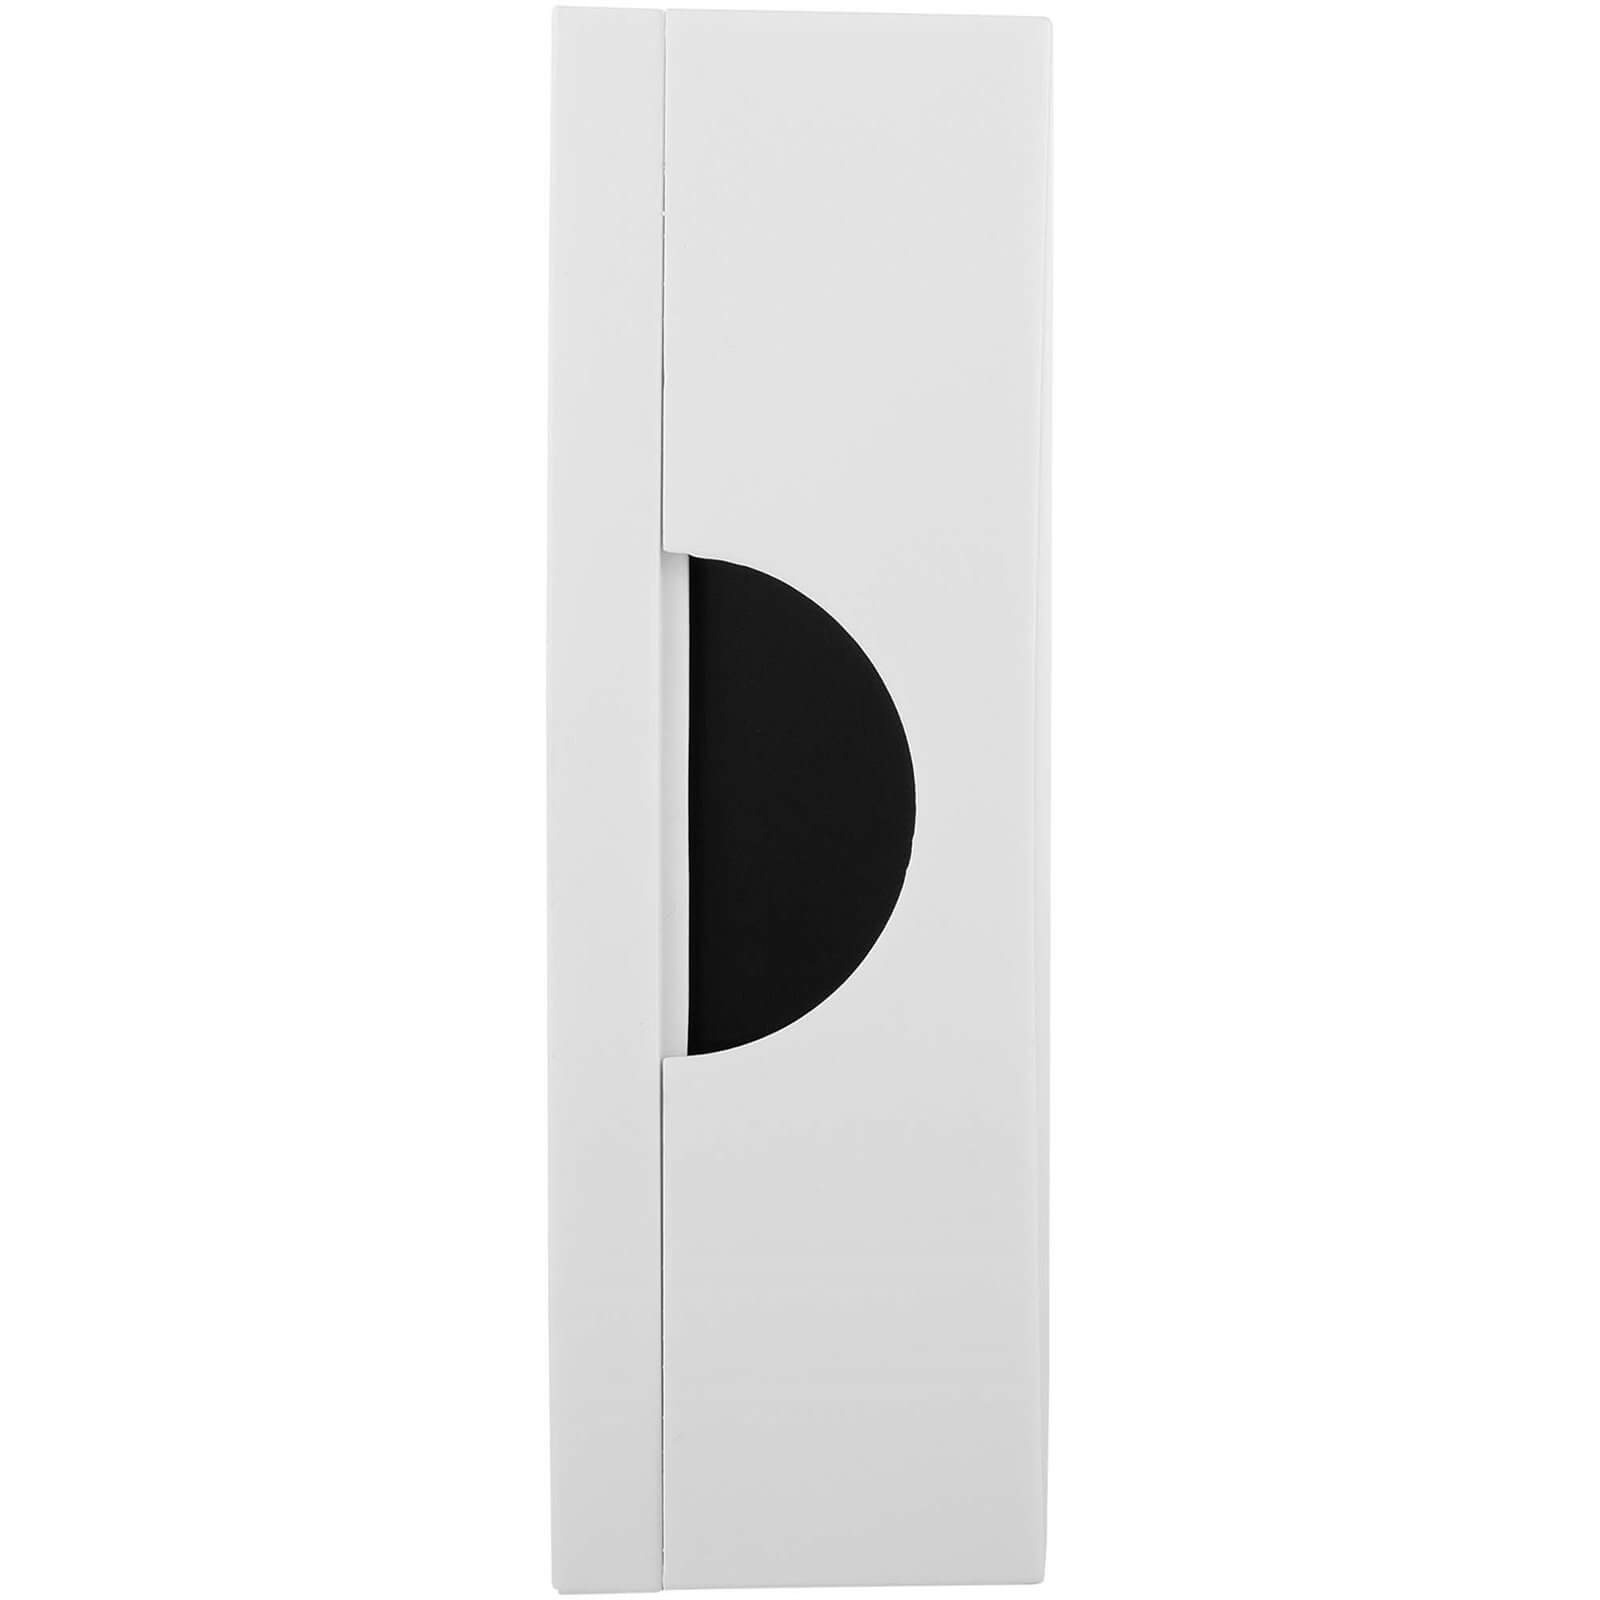 Byron 771 Wired Door Chime